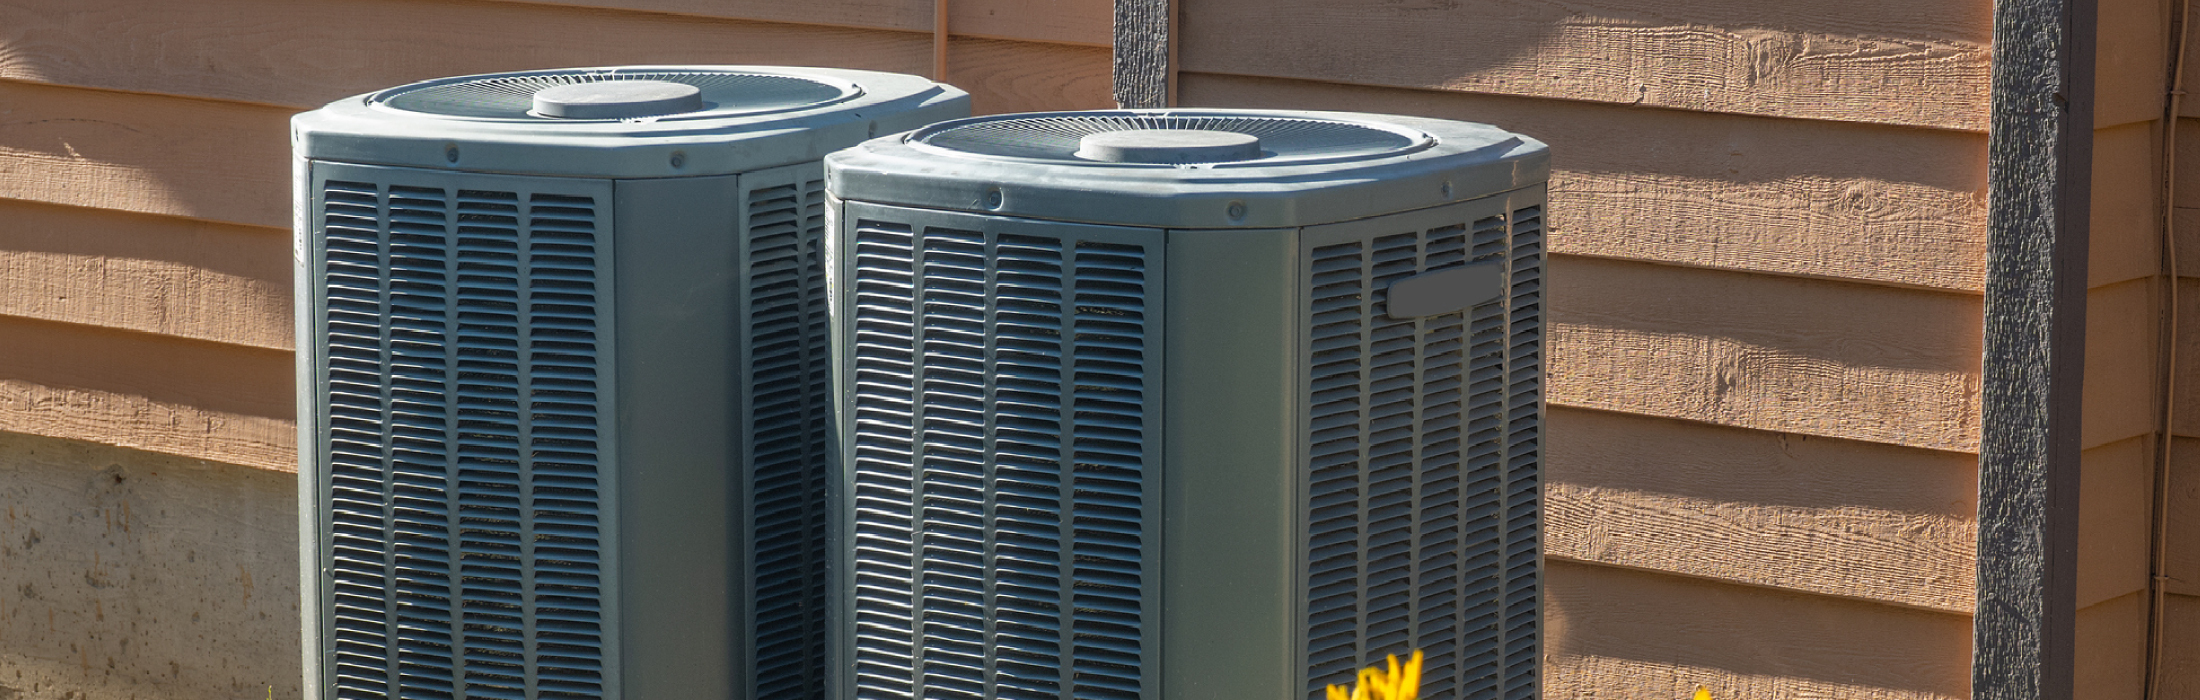 Photo of two air conditioning handlers outside a home or business